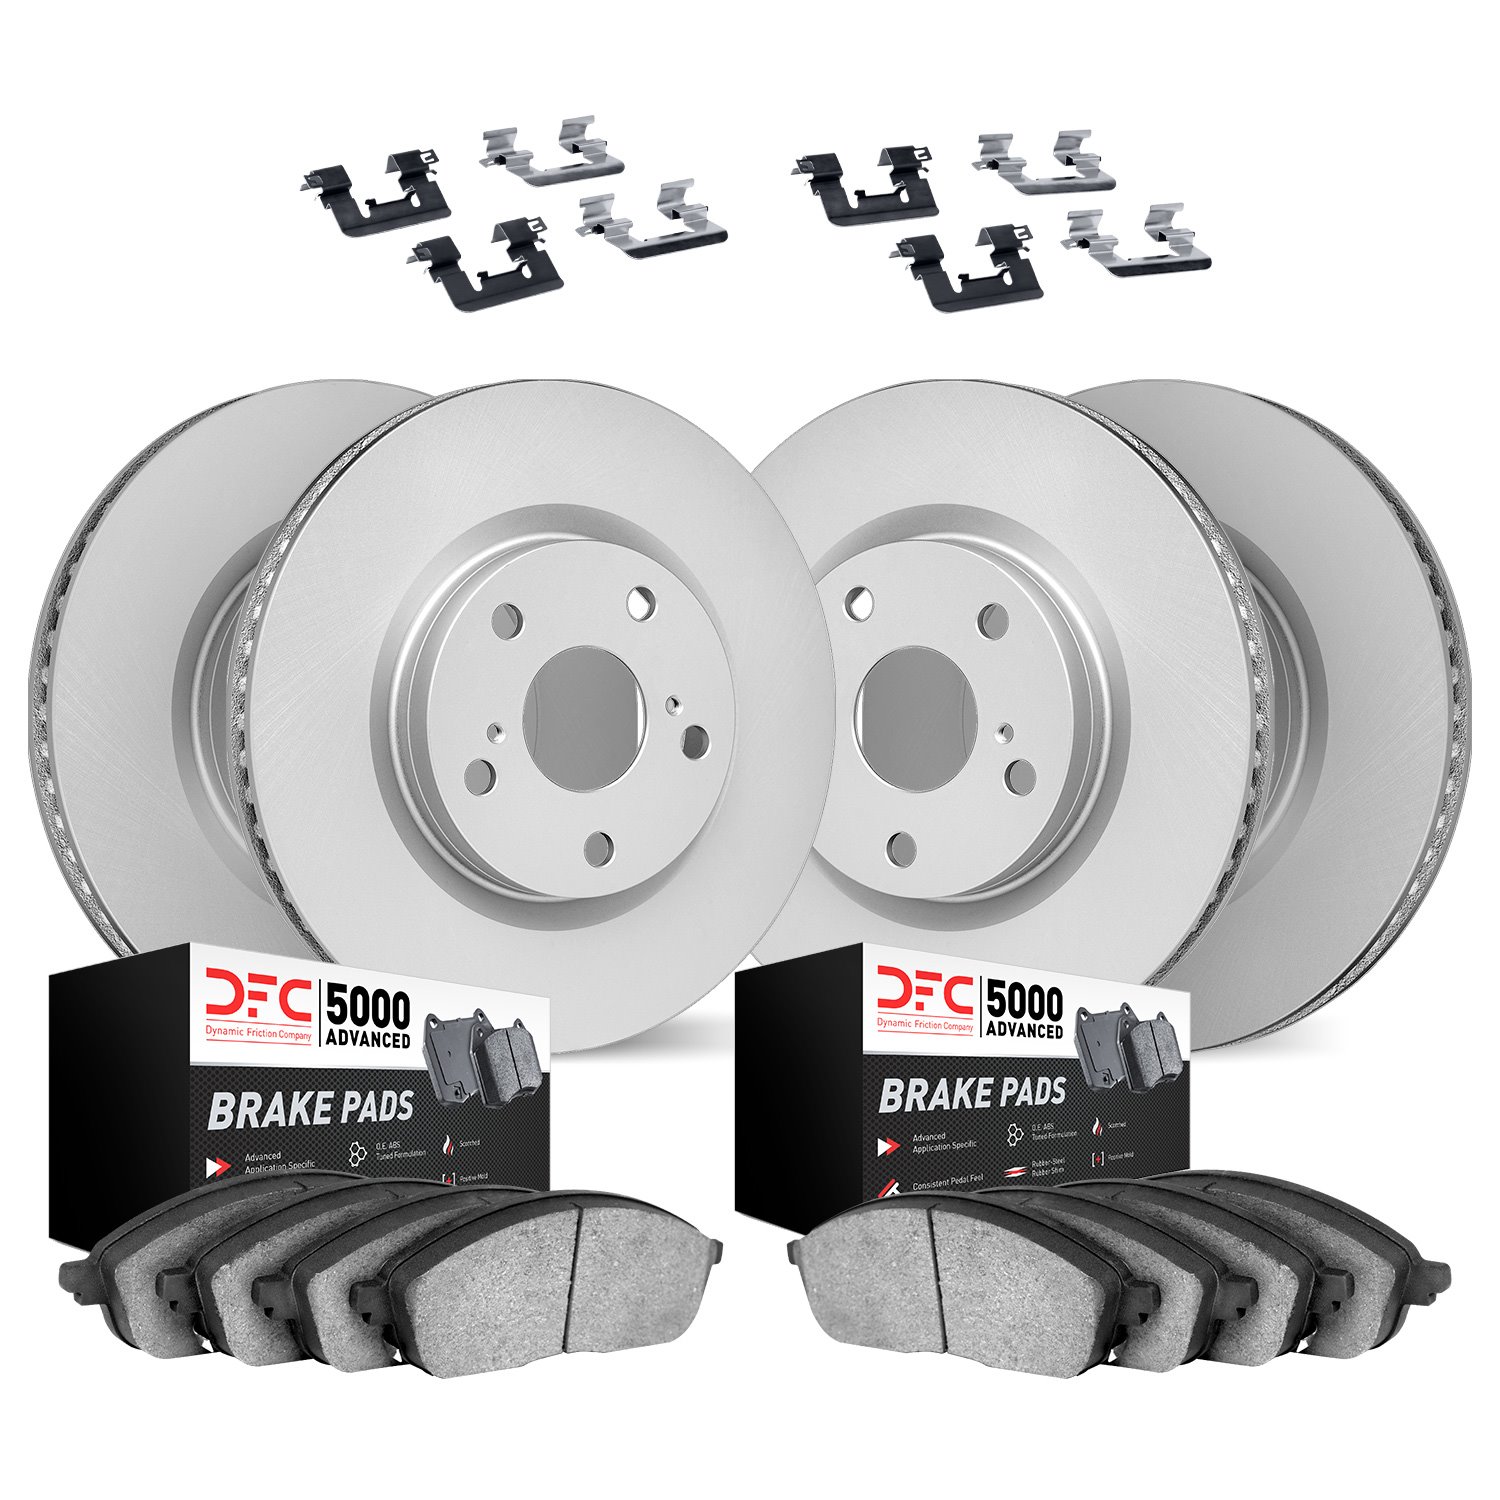 4514-11025 Geospec Brake Rotors w/5000 Advanced Brake Pads Kit & Hardware, Fits Select Land Rover, Position: Front and Rear